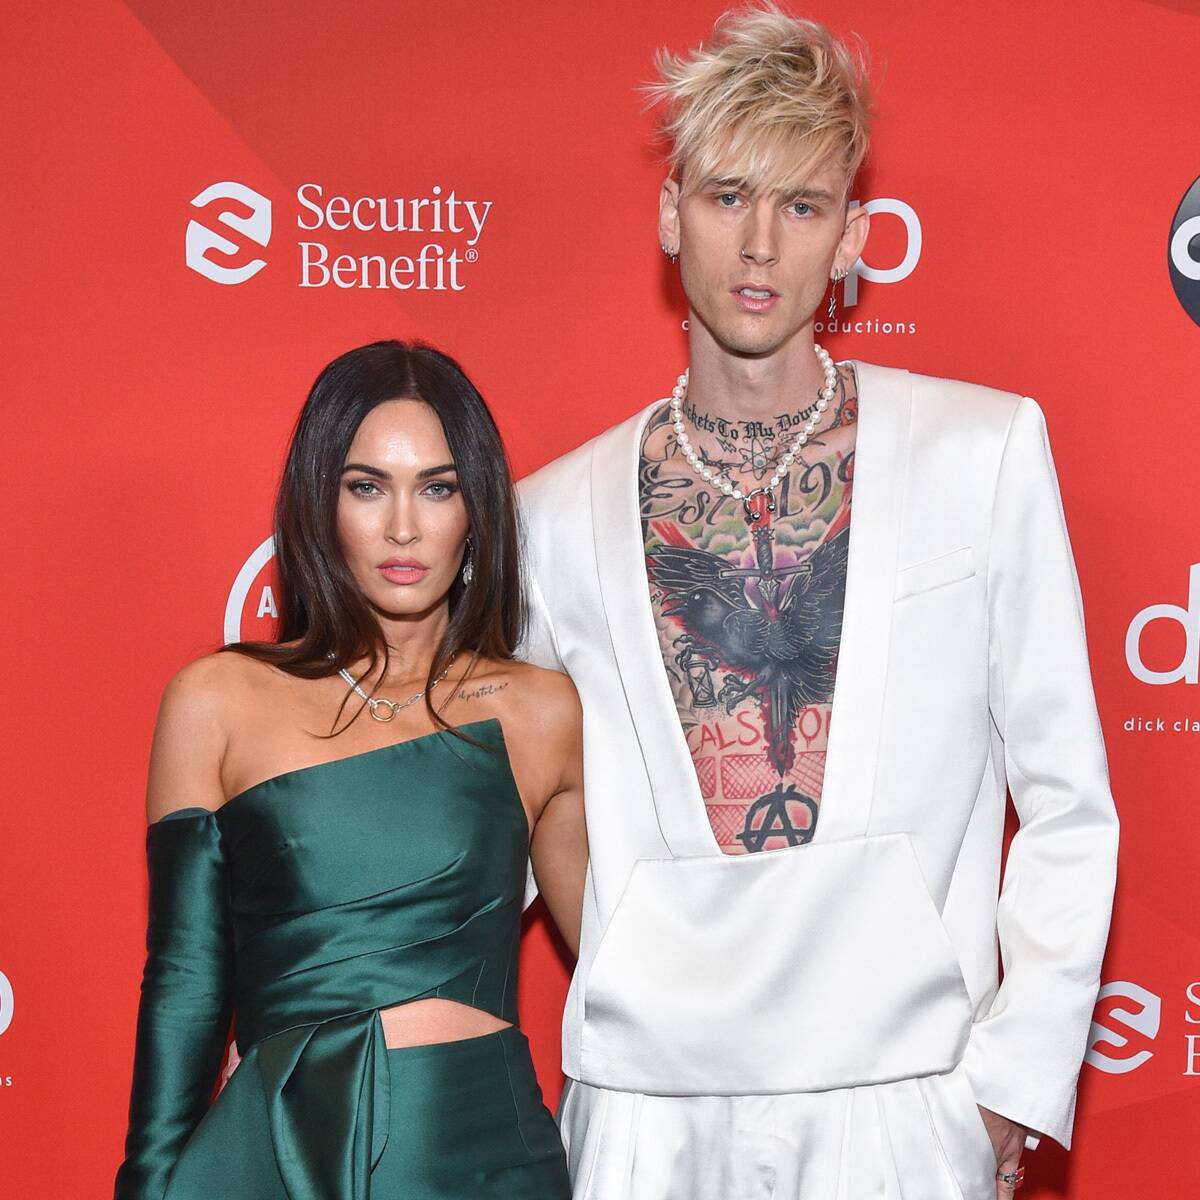 Megan Fox’s Massive Ring Sparks Speculation She’s Engaged to Machine Gun Kelly